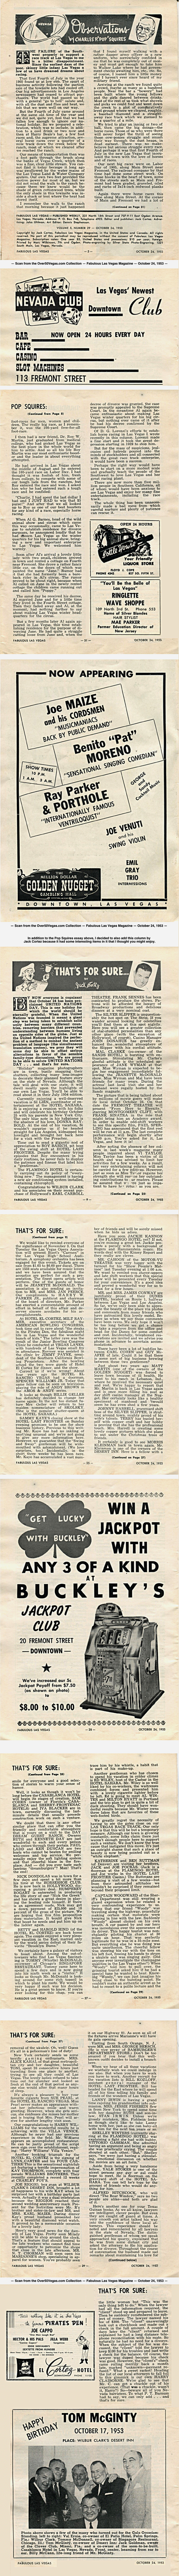 Observations by Pop Squires — Fabulous Las Vegas Magazine —  October 24, 1953